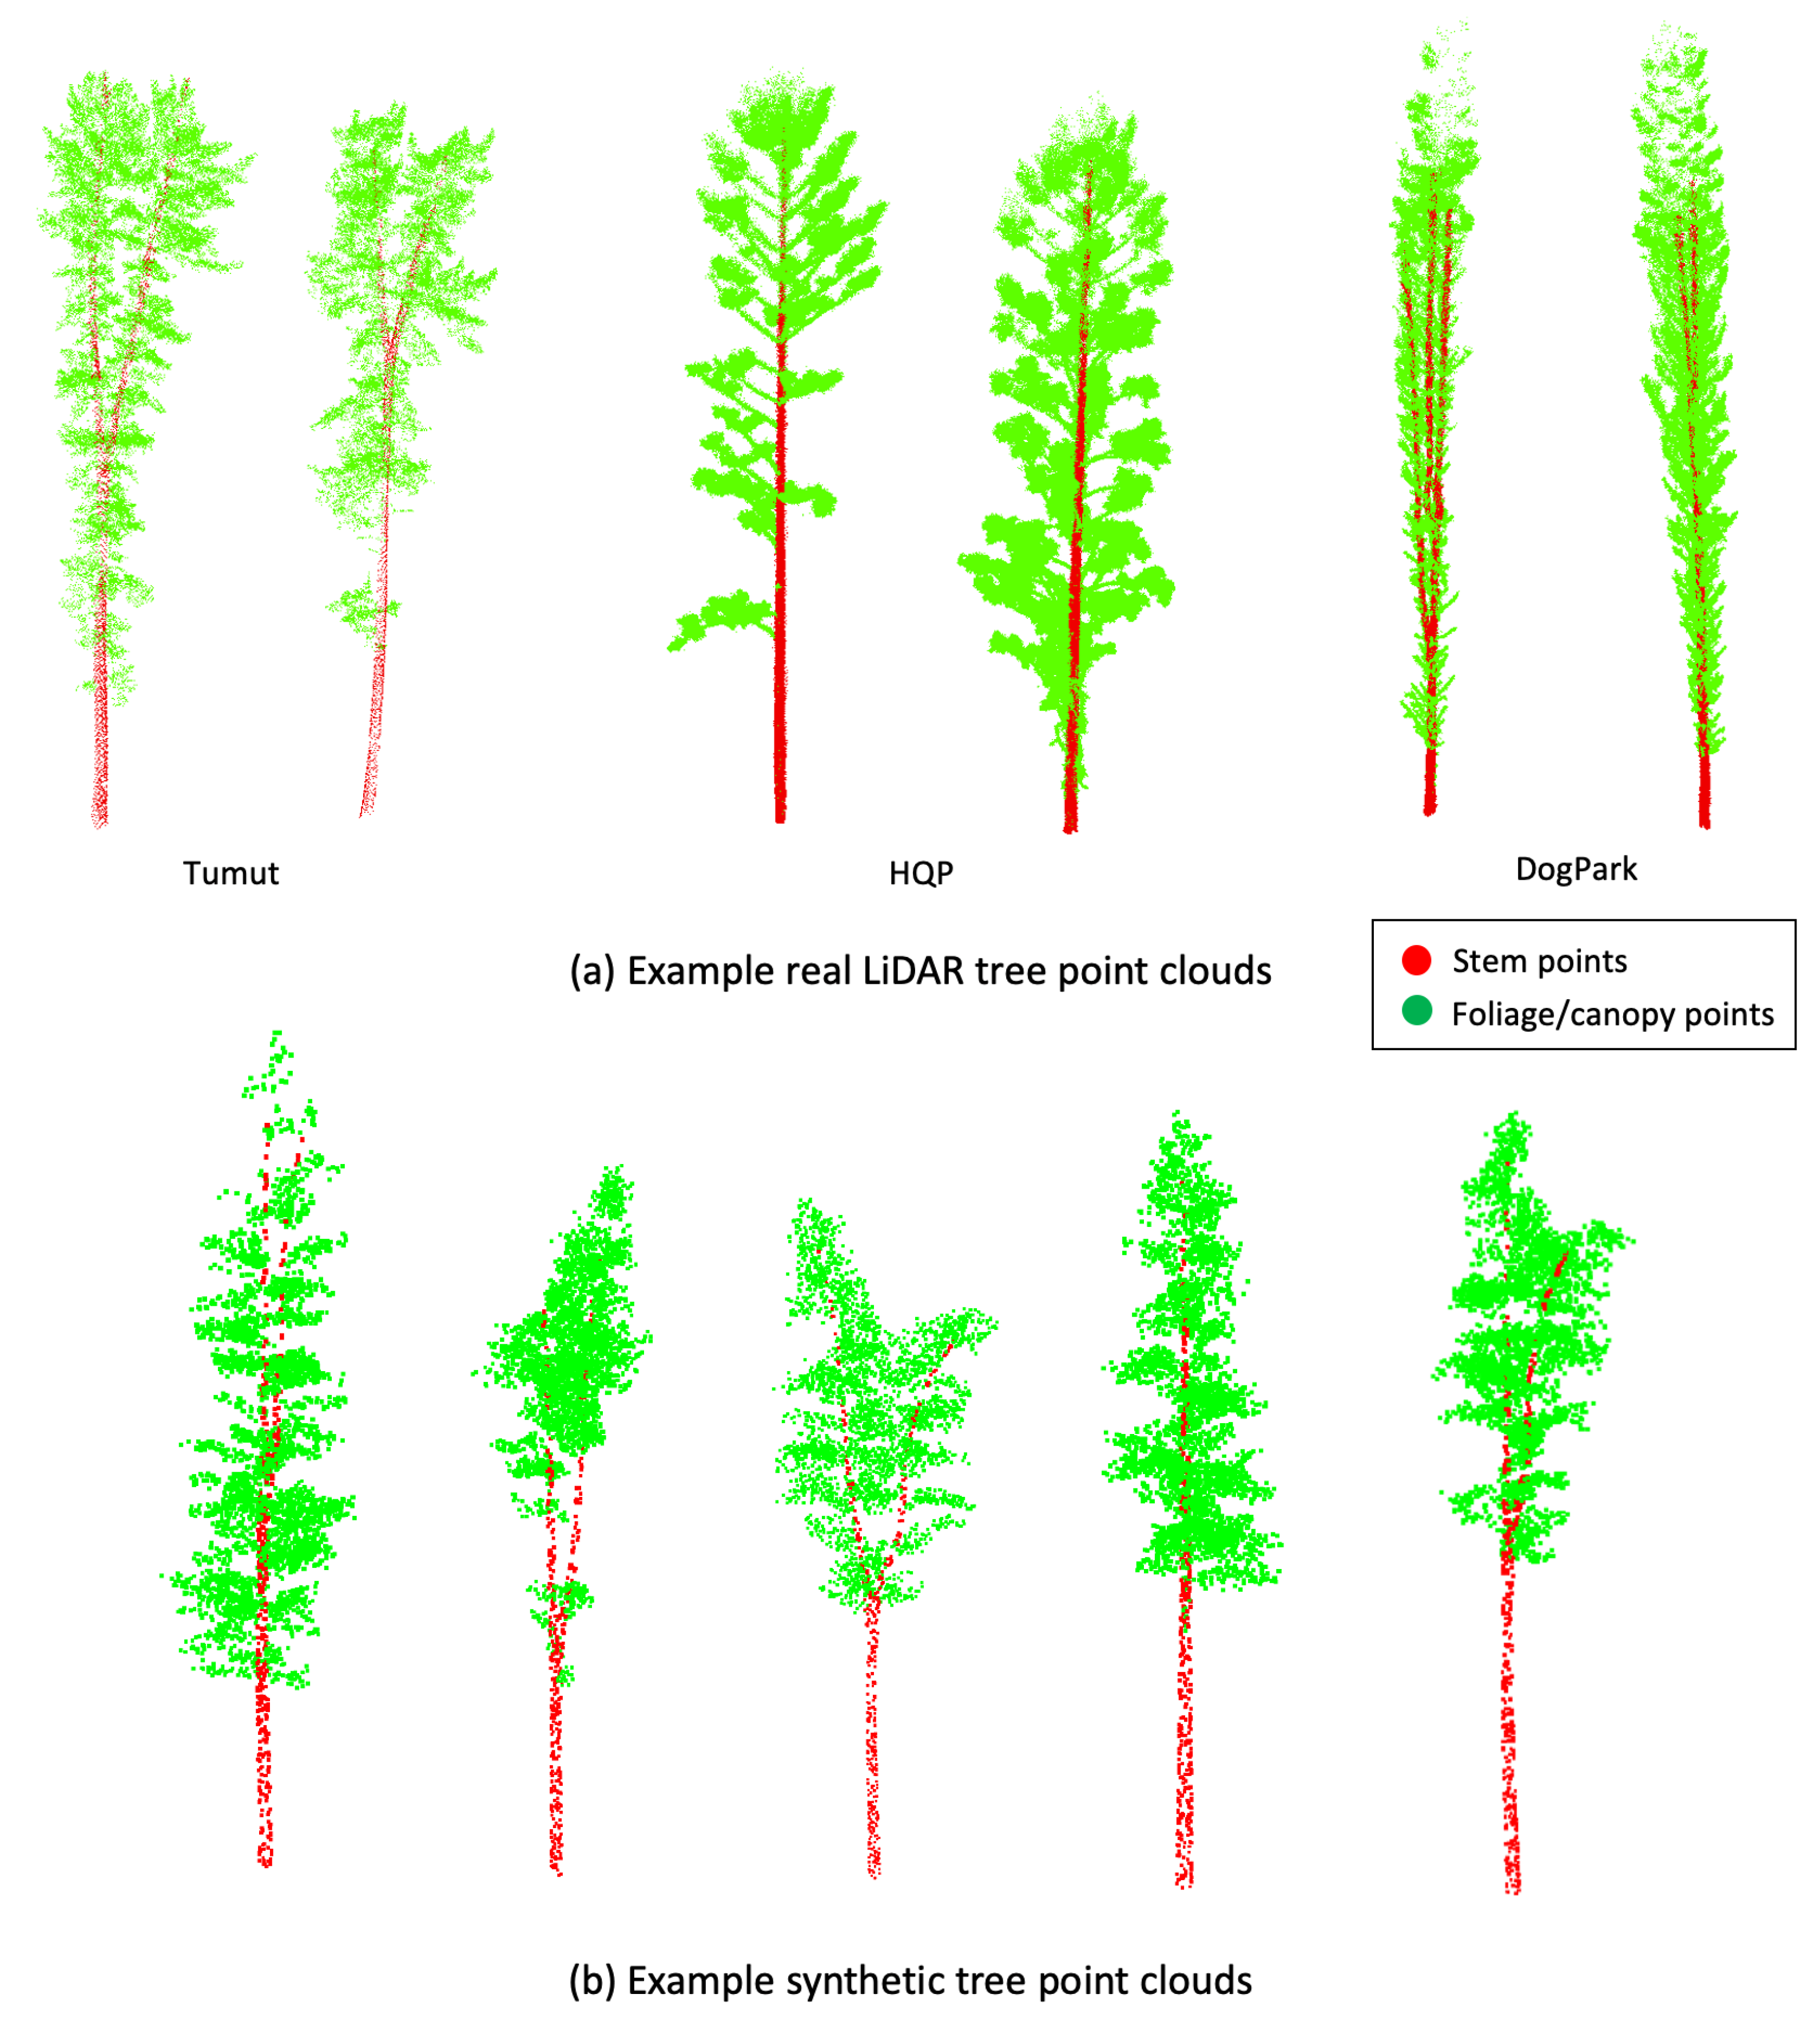 Numbers of roots in different diameter size classes at different depths